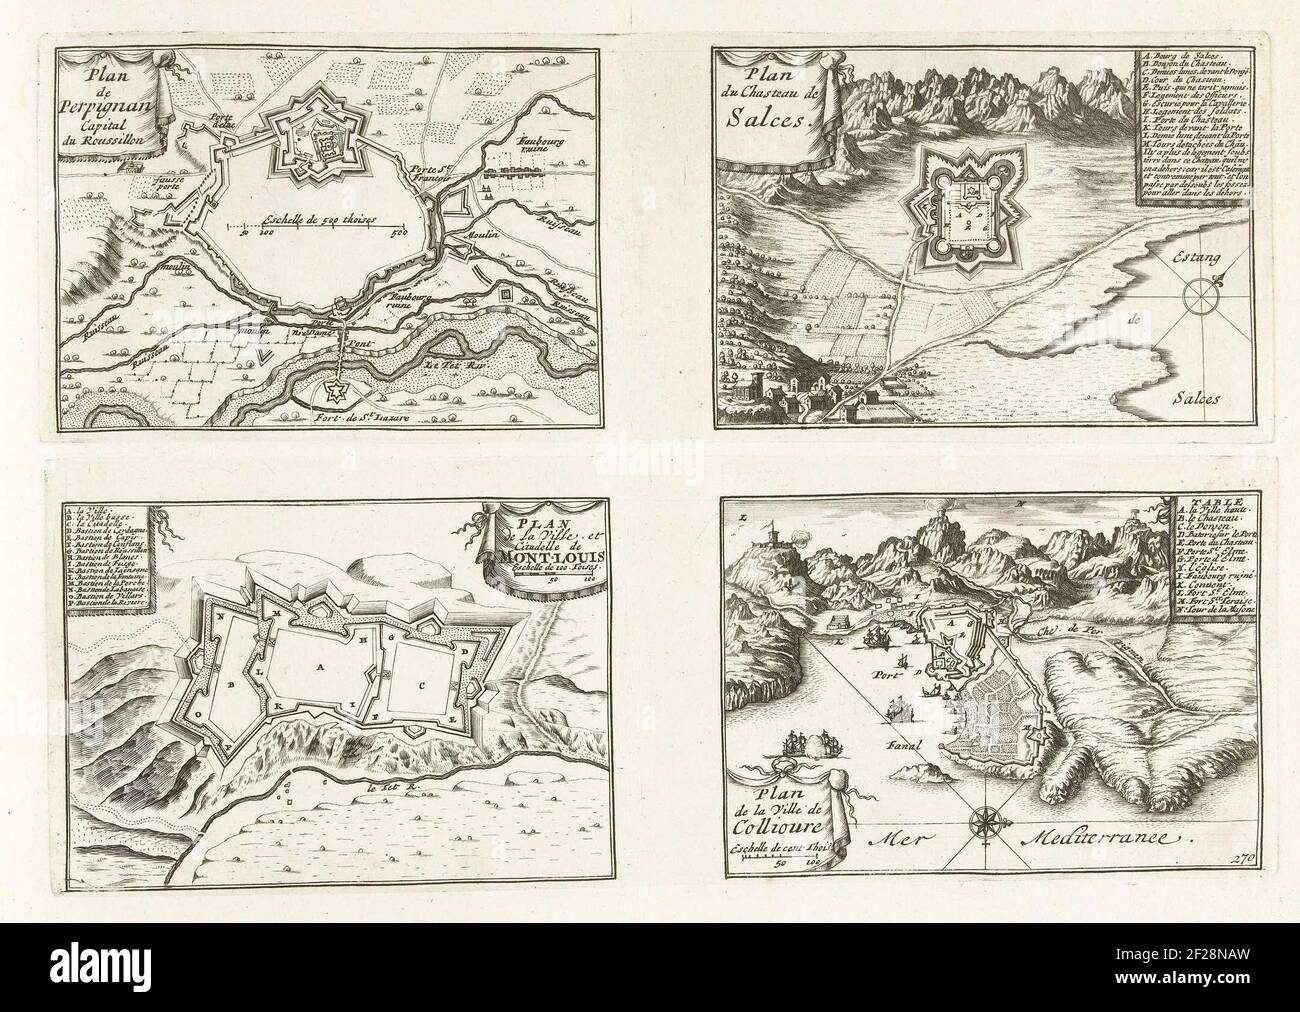 Plattegronden van Perpignan, Salces, Mont-Louis collioure, ca. 1702;  Perpignan / Salces / Mont-Louis / Collioure; The forces of Europe, Asia,  Africa and America, or description of the main cities with their  fortifications.